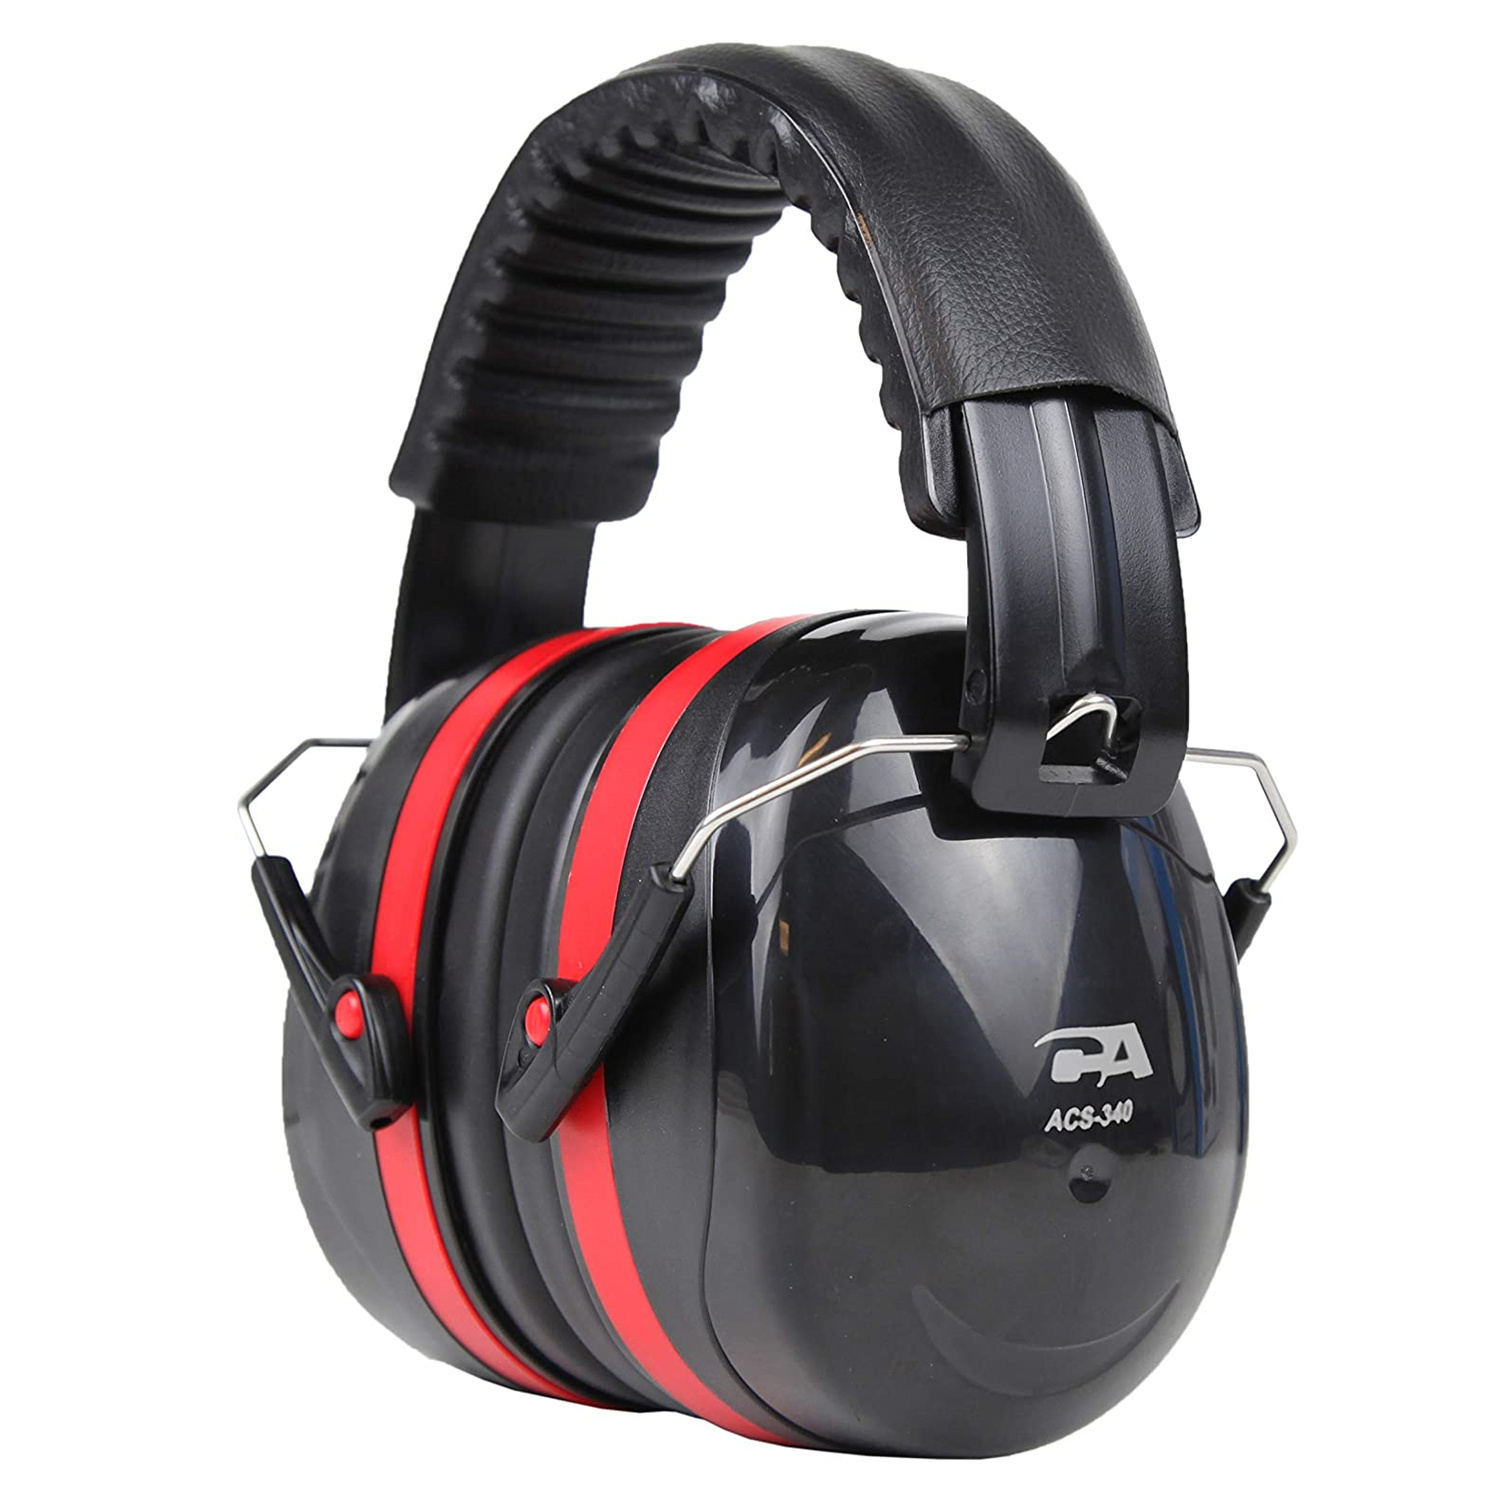 Vinmall Noise Reduction Safety Earmuffs, Adjustable Hearing Protection Over-ear  Muffs, SNR 32dB Noise-Canceling Ear Defenders for Sawing Shooting Hunting,  ACS-340, Black